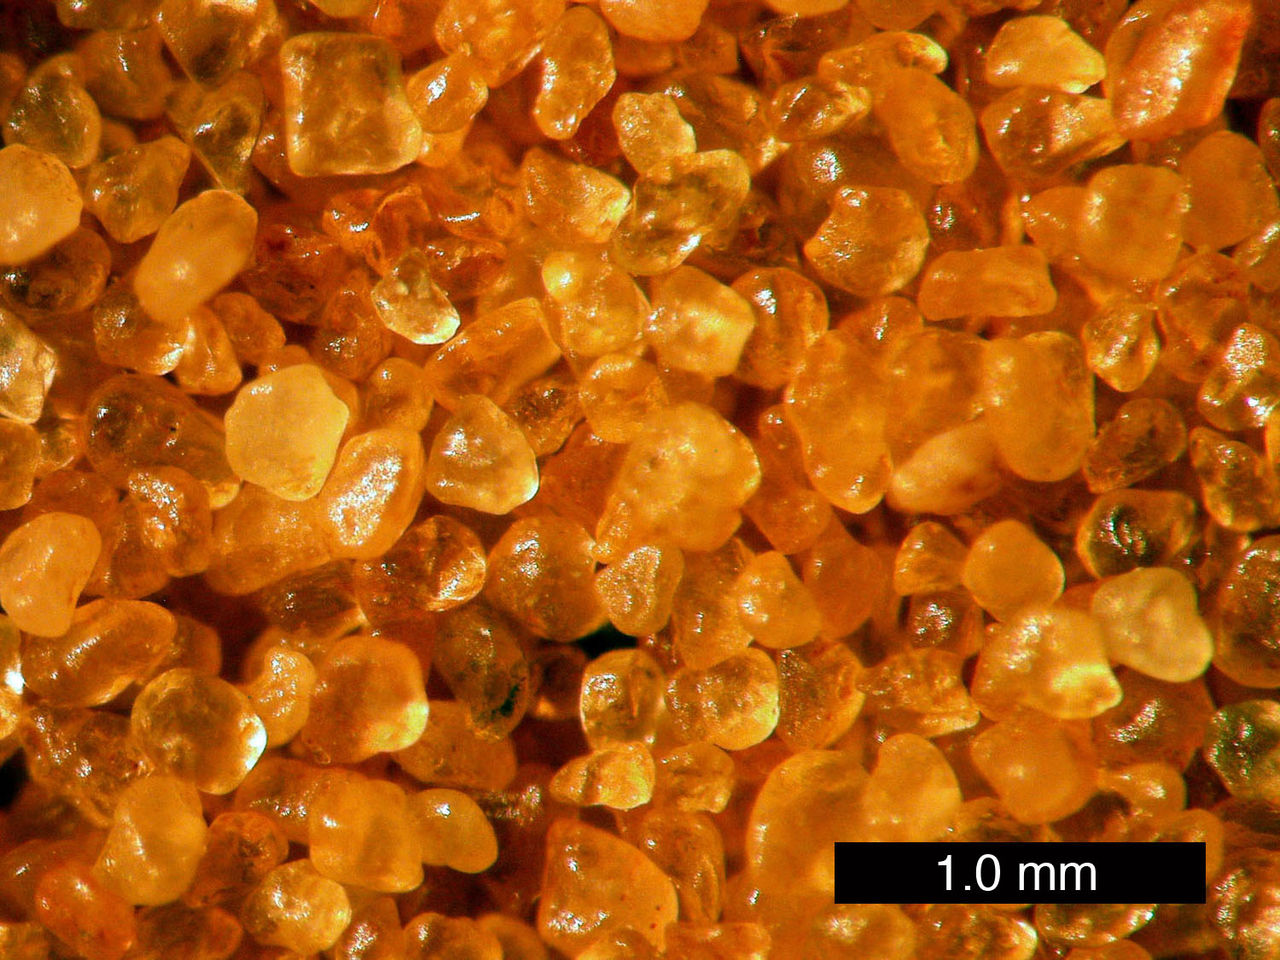 Close-up photo of unconsolidated amber-colored glassy grains with rounded edges; a scale bar at the lower right says 1.0 mm.